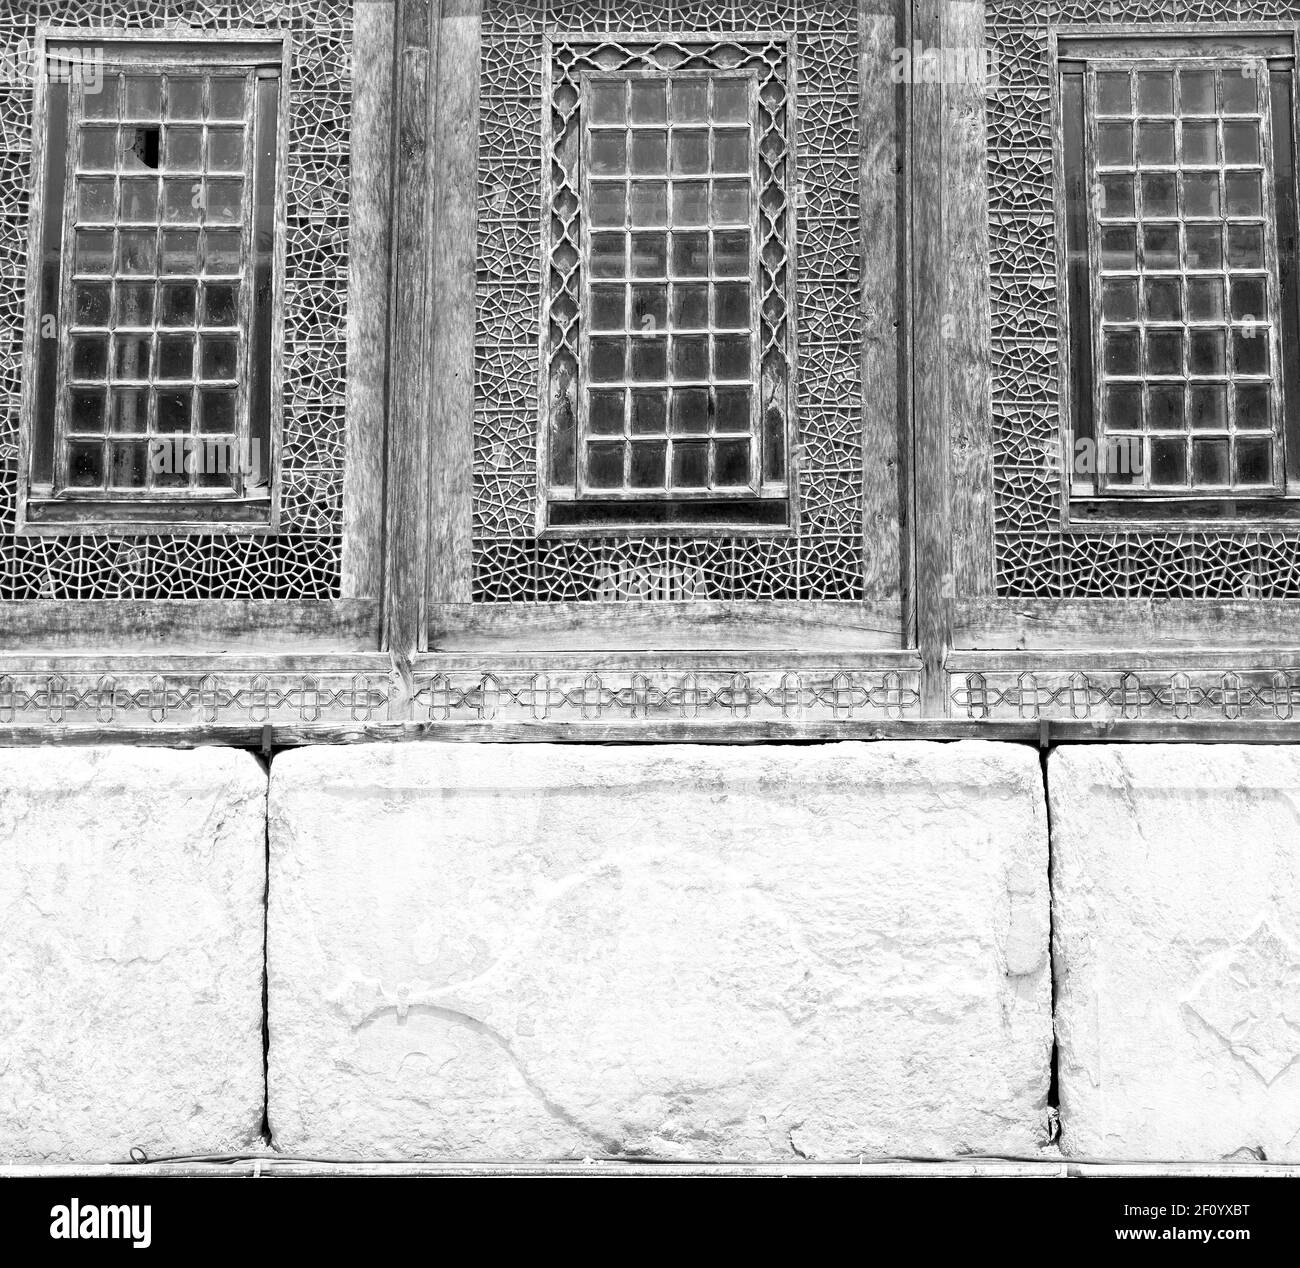 In iran  the old   architecture   window Stock Photo